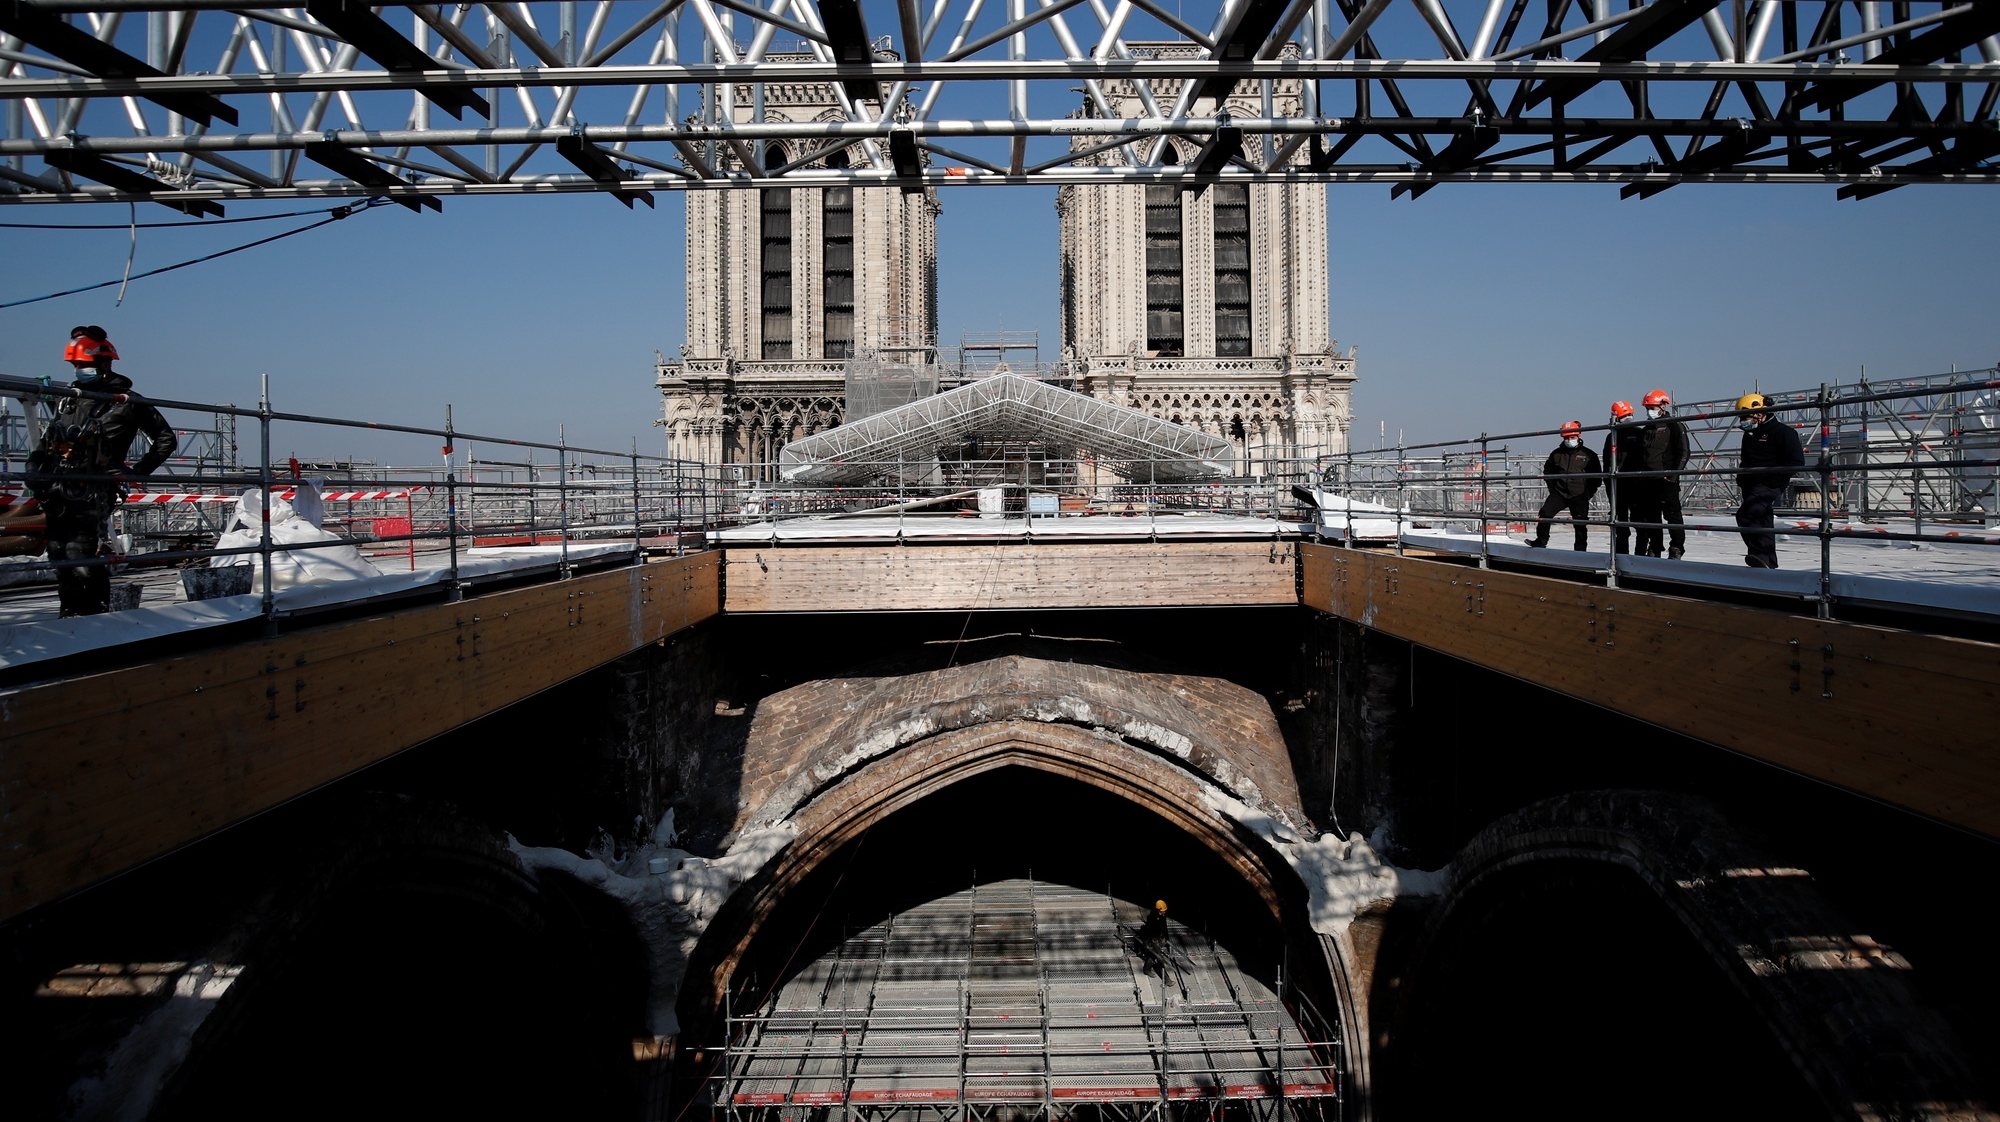 epa09136441 Workers watch the ongoing works at the reconstruction site of the Notre-Dame de Paris Cathedral, which was damaged in a devastating fire two years ago, as restoration works continue, in Paris, France, 15 April 2021. On 15 April 2019, the structure and roof of the 850-year-old gothic Notre-Dame Cathedral suffered a devastating fire. Some 500 firefighters managed to prevent the entire cathedral from being reduced to ashes, although its celebrated spire has been destroyed. French President Emmanuel Macron promised to rebuild the cathedral within five years.  EPA/BENOIT TESSIER / POOL MAXPPP OUT